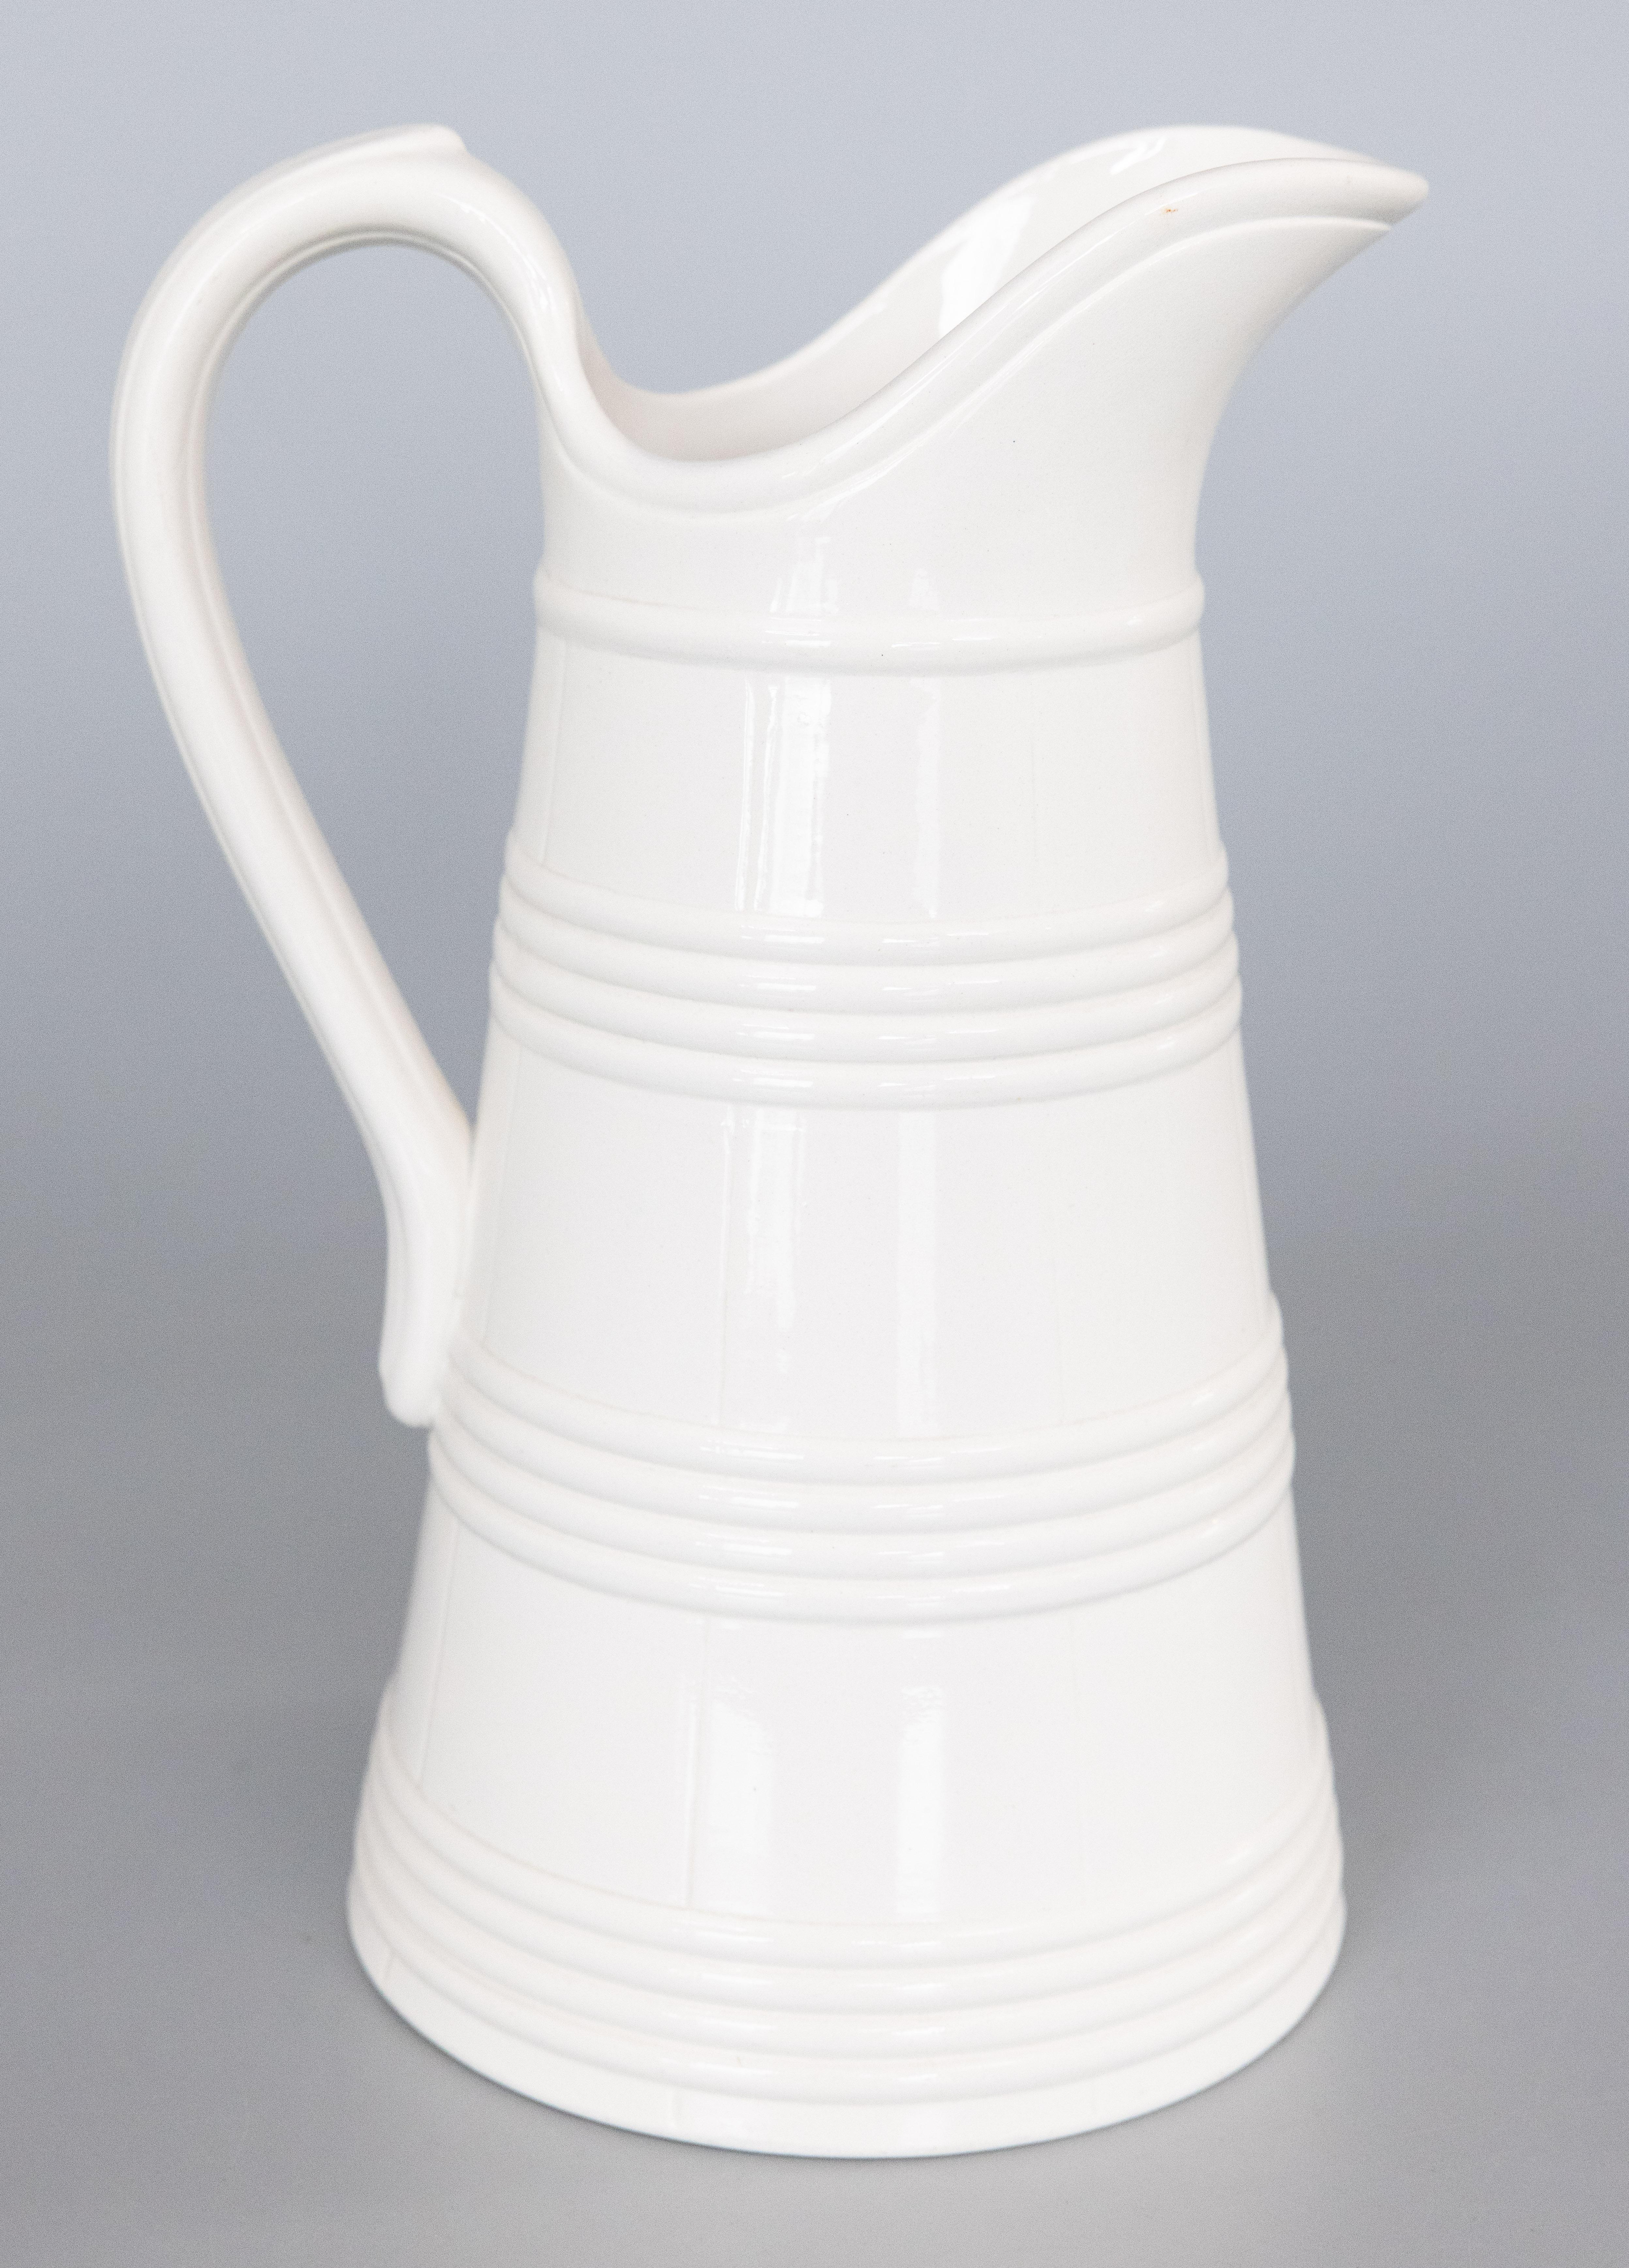 A lovely large antique Belgian white ironstone pitcher, circa 1880. Made by Boch La Louviere, in Belgium, signed on reverse. This fine quality pitcher is a nice large size measuring 13.5 inches tall and has simple clean lines, perfect for the modern